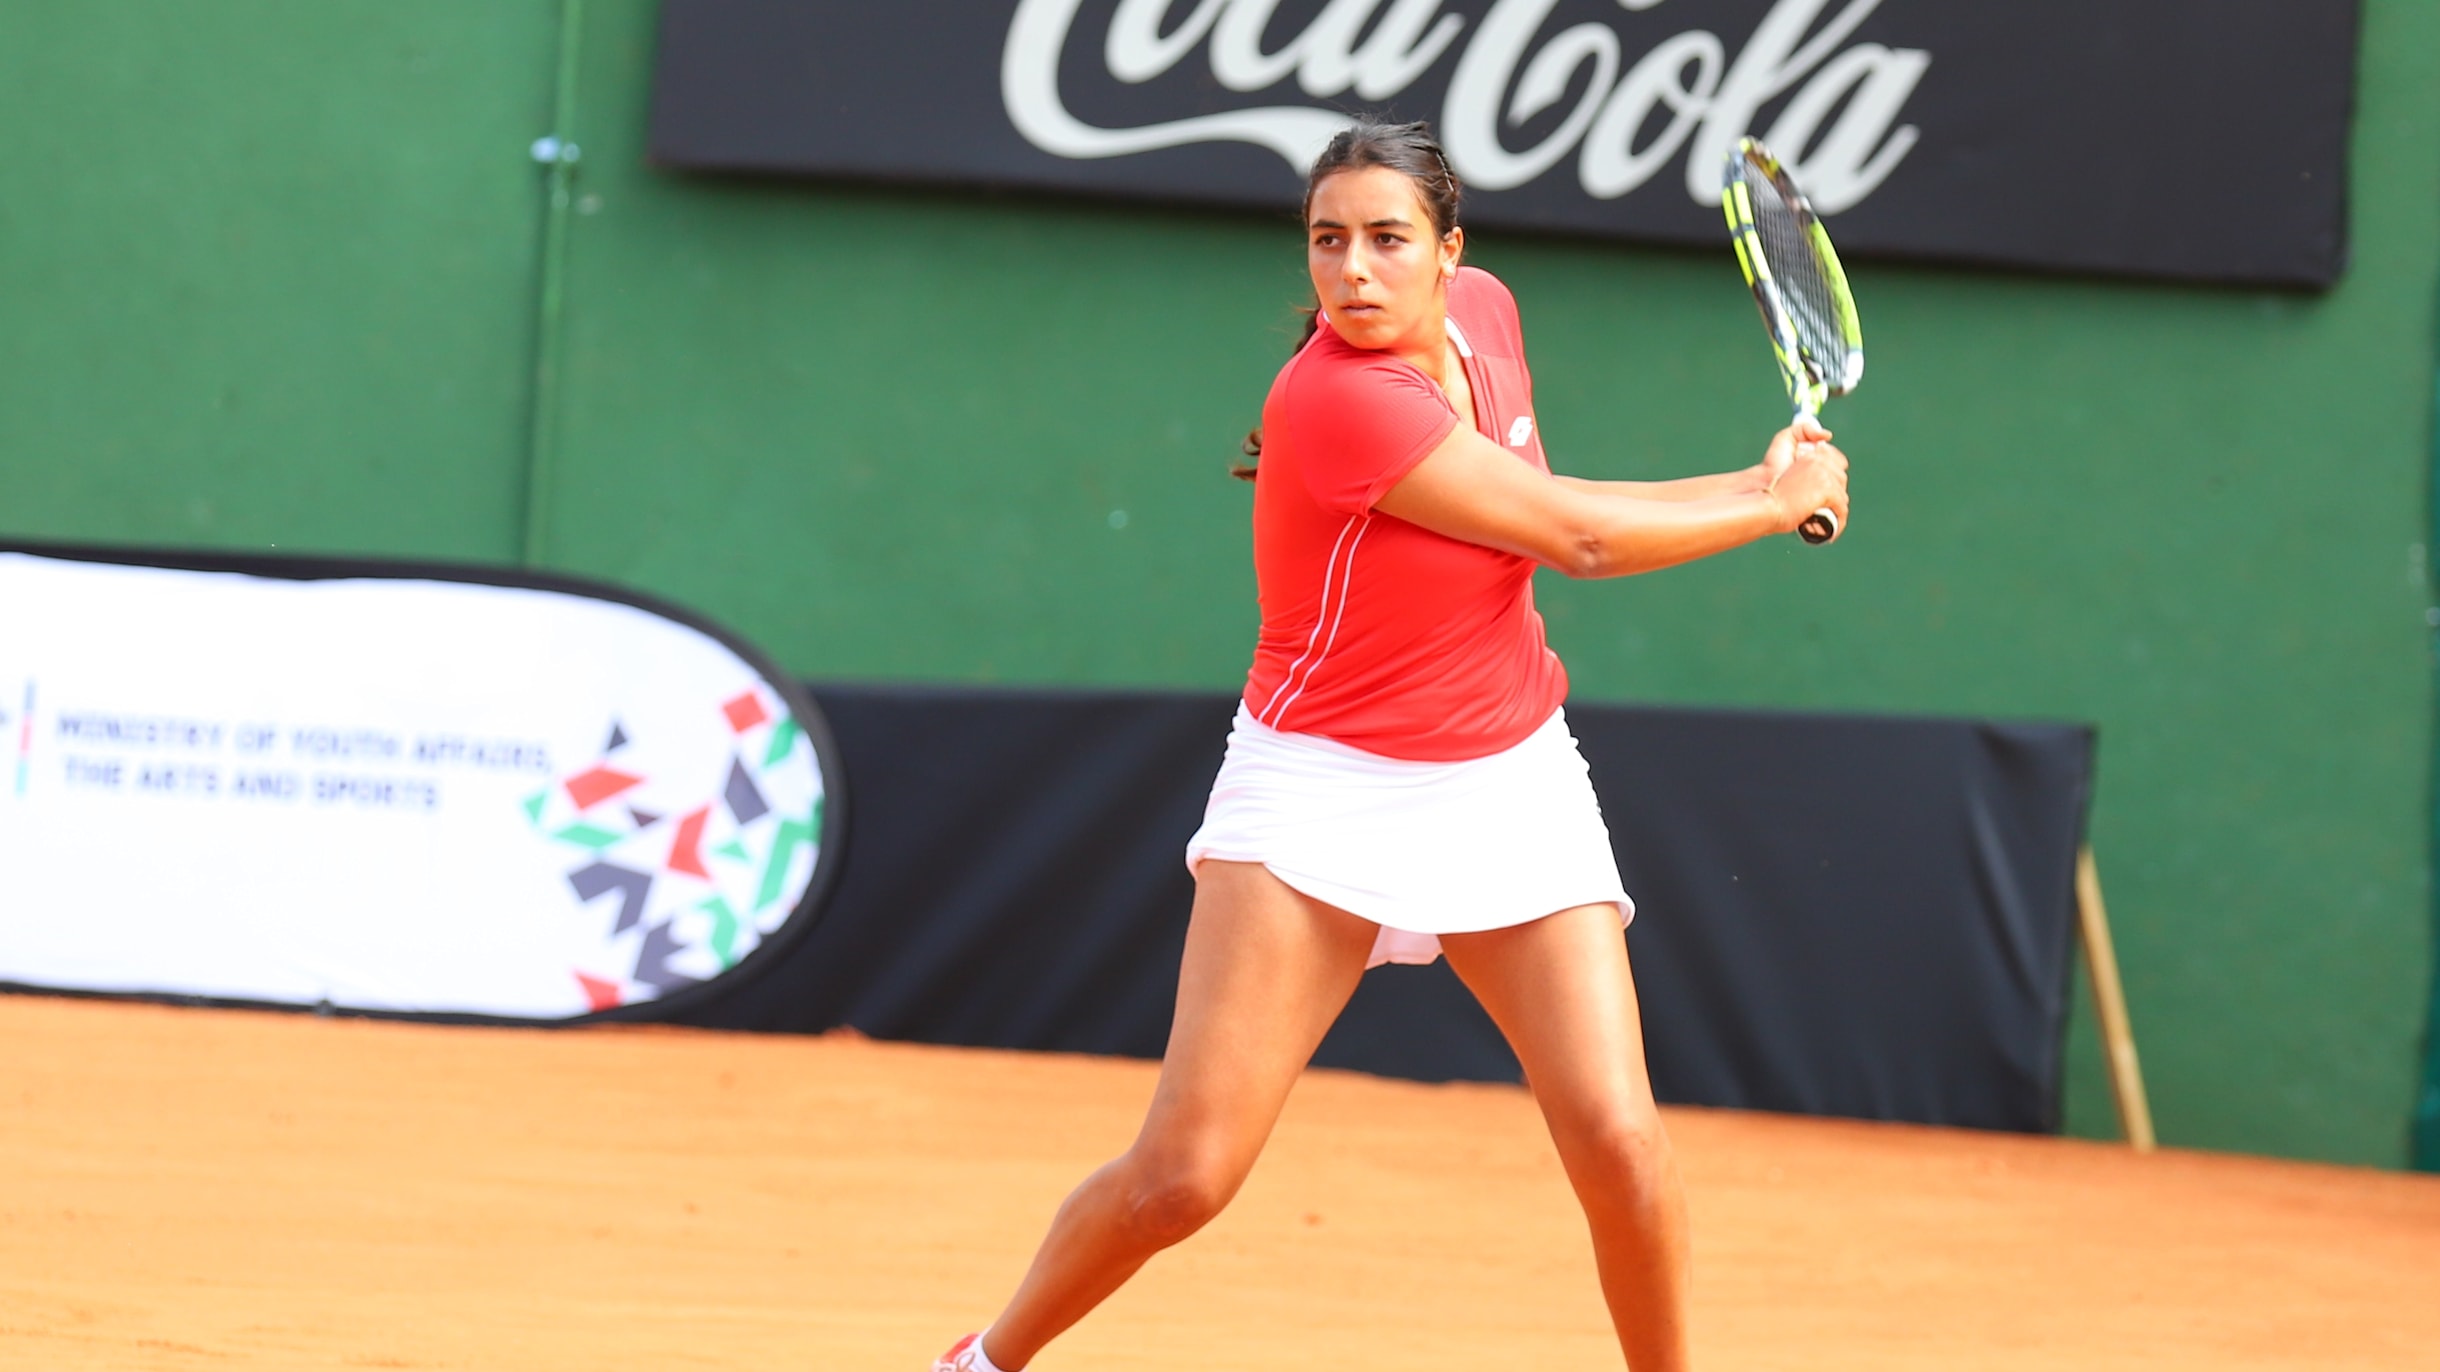 Aya El Aouni Moroccos rising tennis star inspired by Ons Jabeurs success and making waves in the tennis world